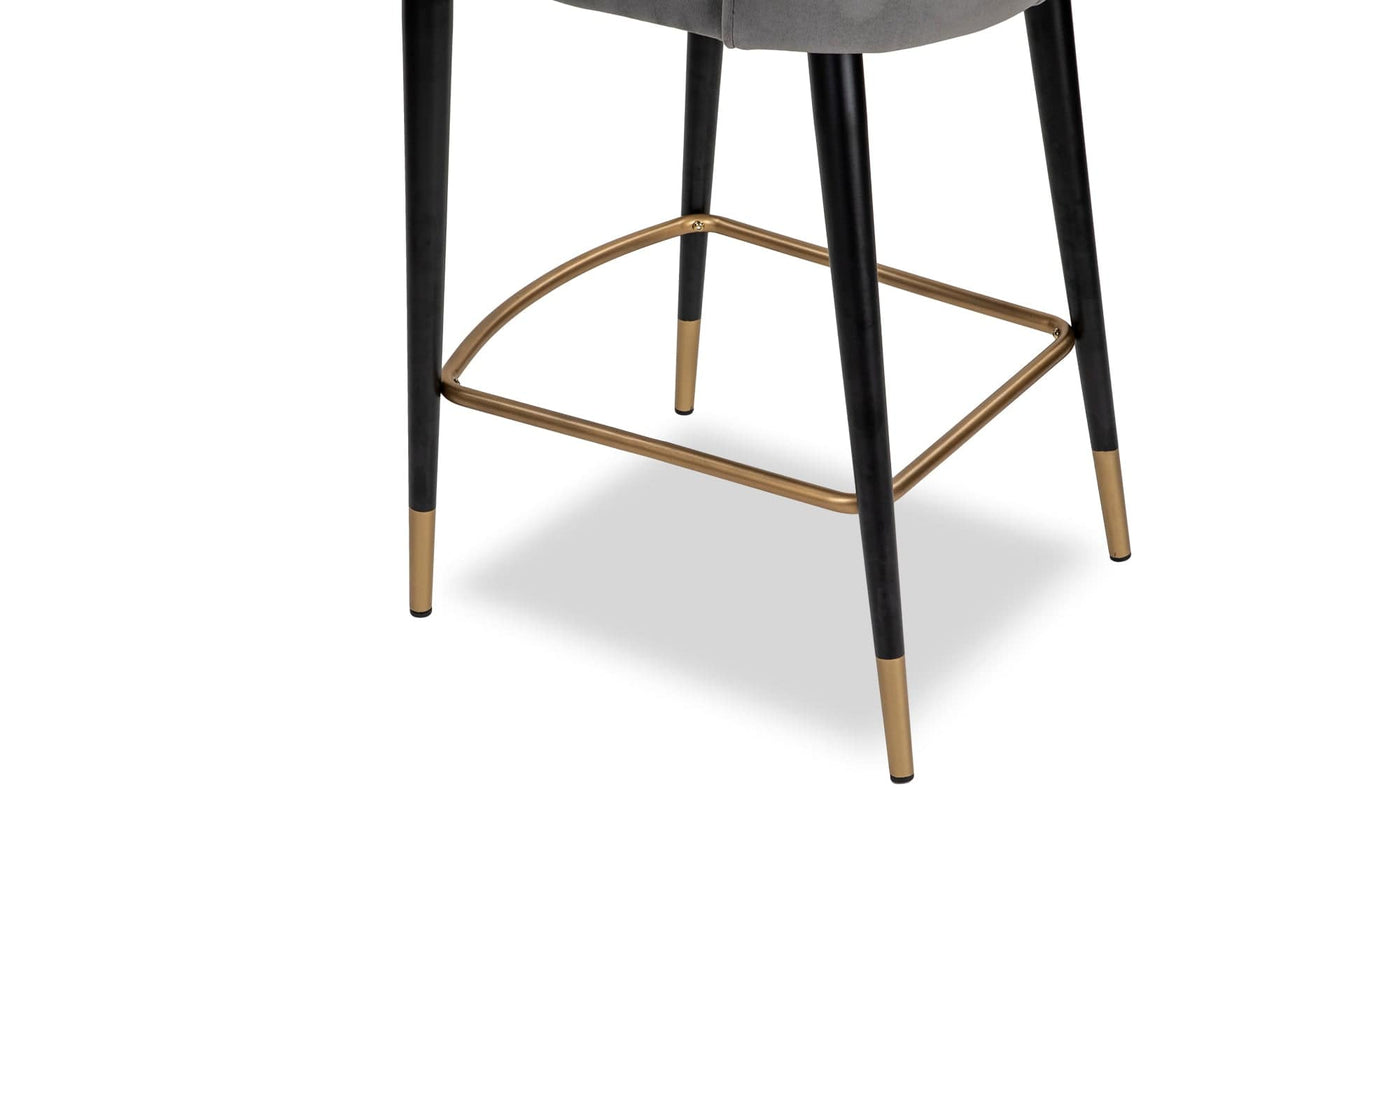 Liang & Eimil Dining Maya Counter Stool - Kaster Anchor Grey Velvet | OUTLET House of Isabella UK